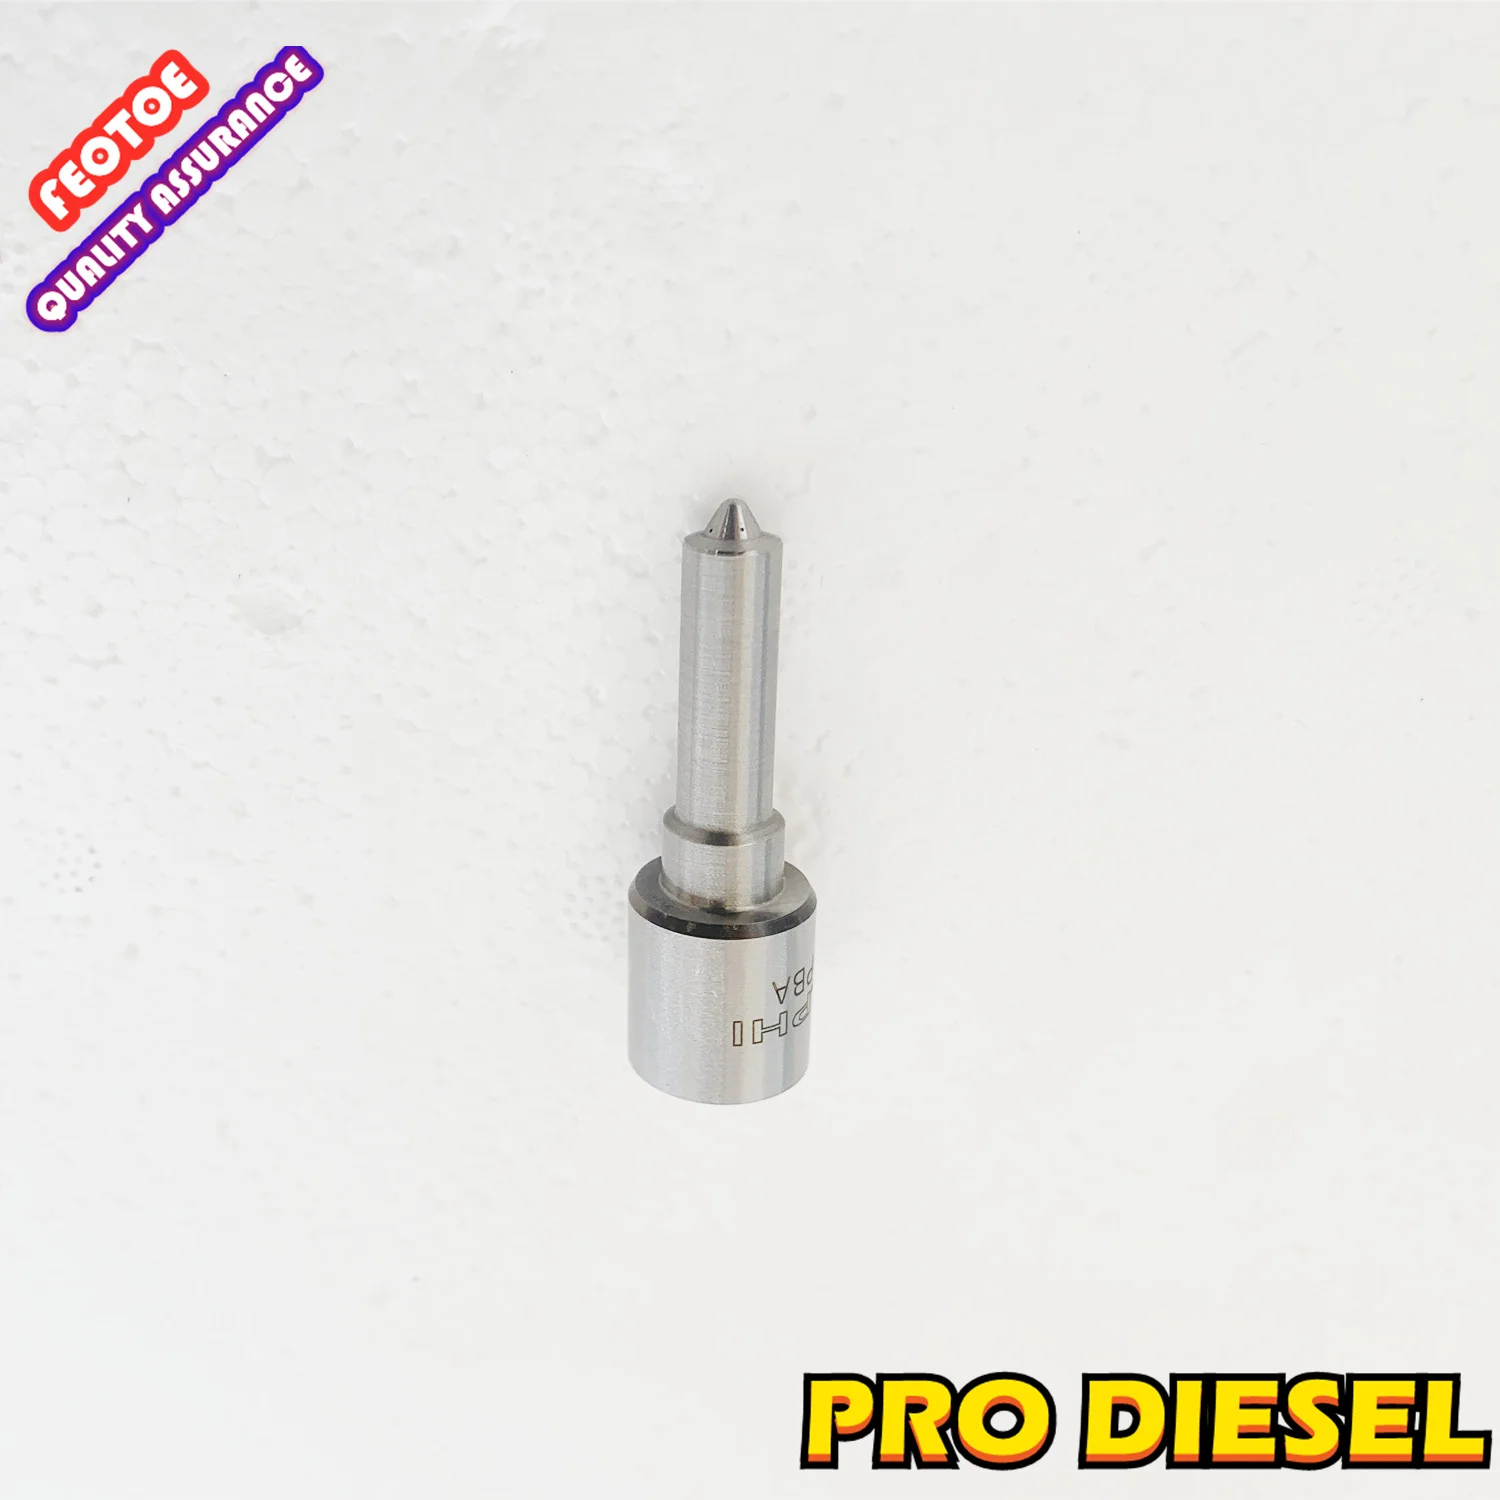 

Diesel Engine Fuel Pump Injection Nozzle DSLA145P681 NEW High Quality